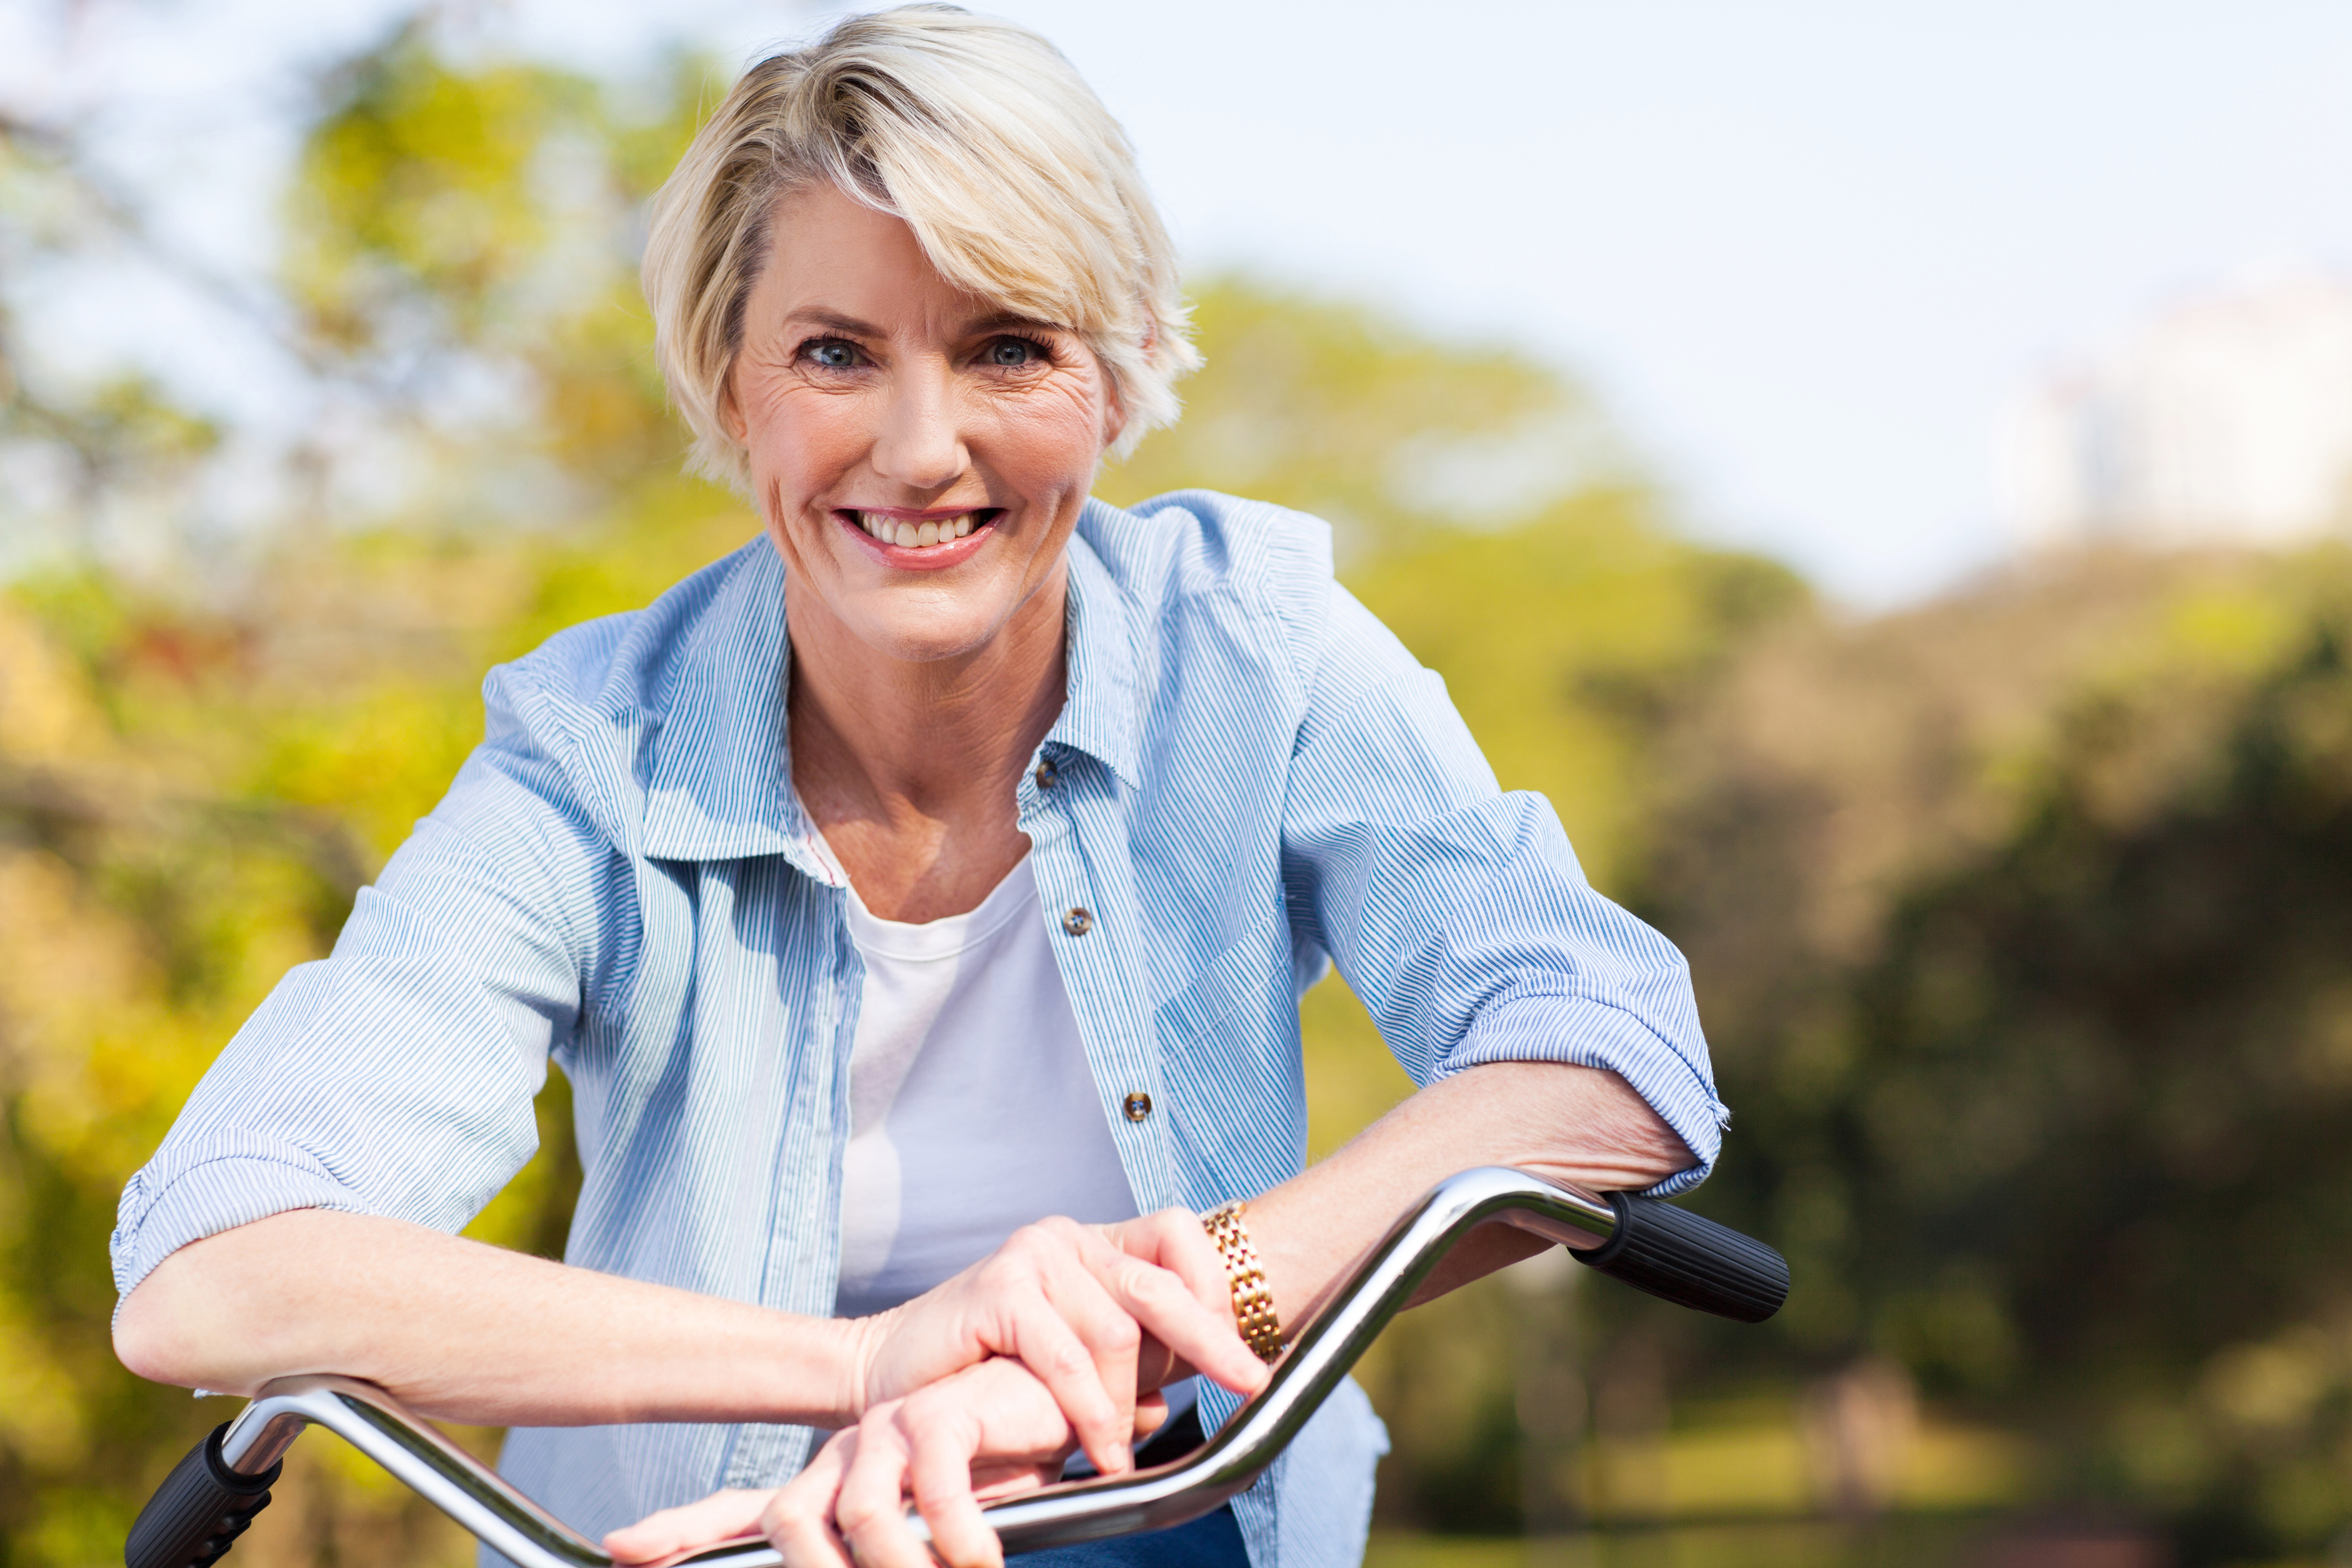 An older woman poses over the handlebars of a bike